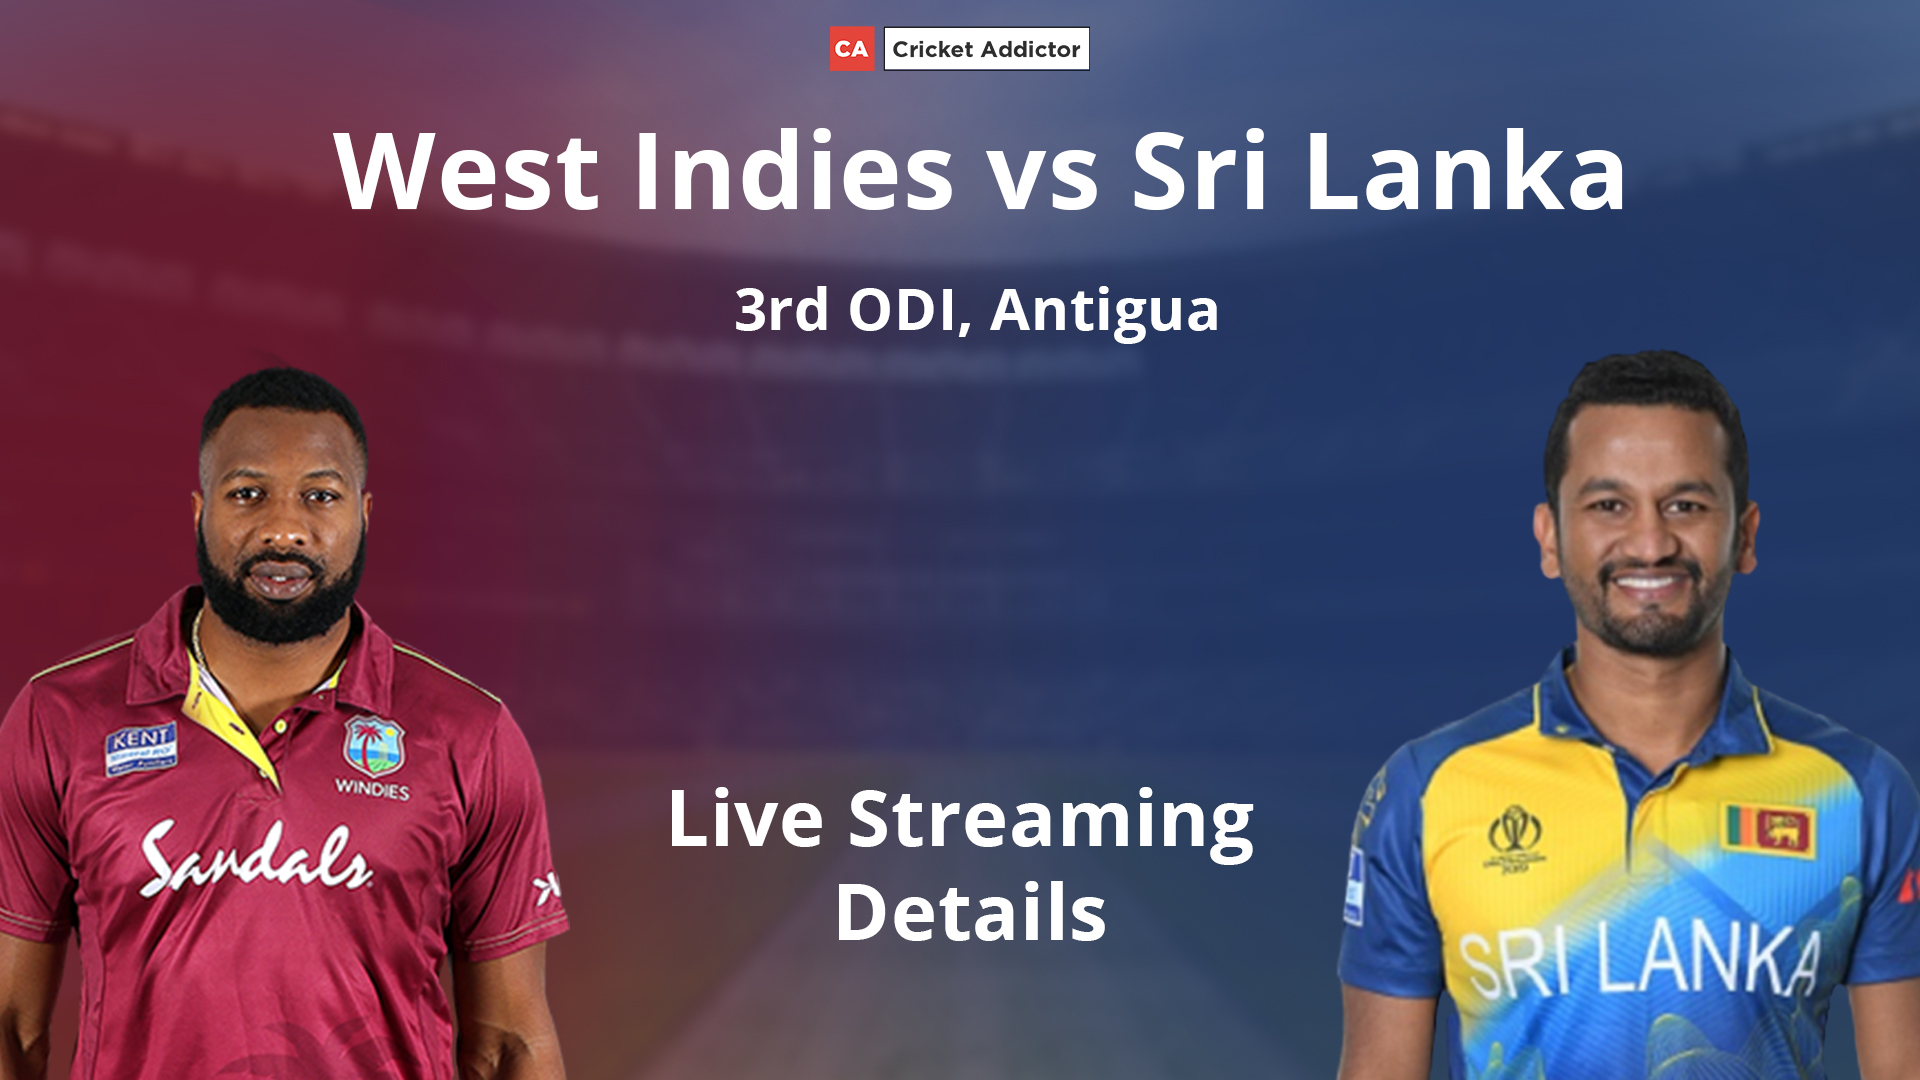 West Indies vs Sri Lanka 2021, 3rd ODI: When And Where To Watch, Live Streaming Details